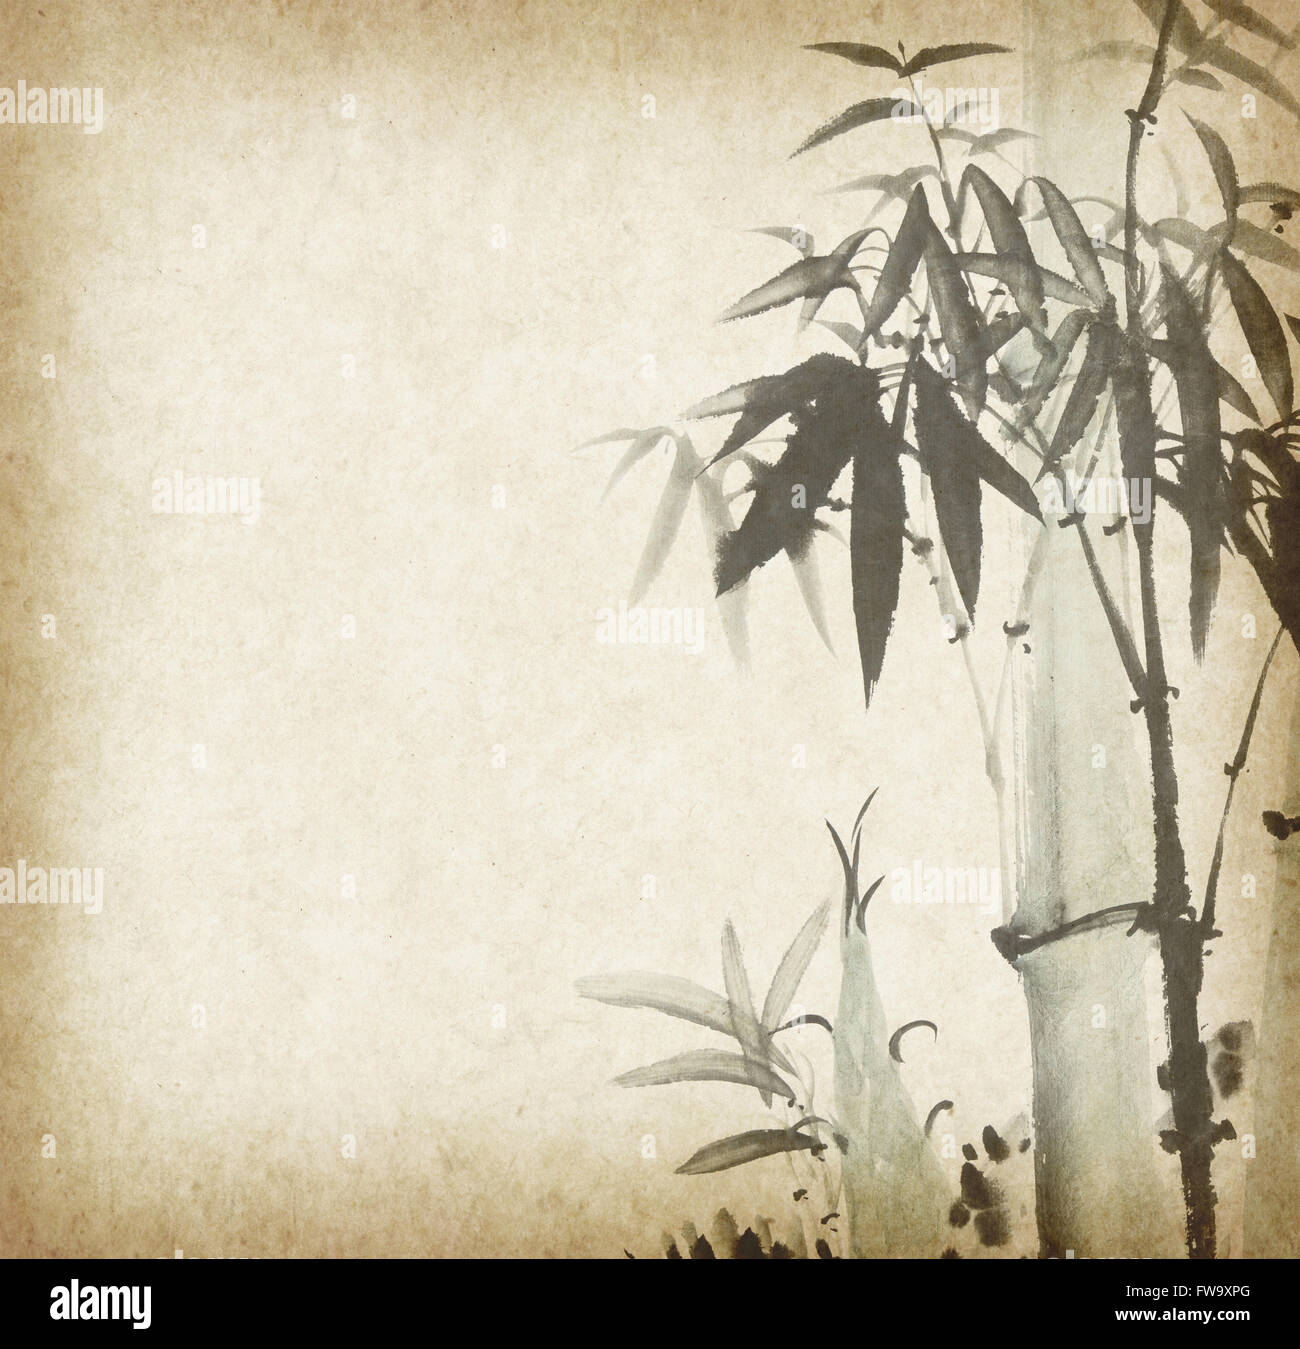 bamboo on old grunge paper texture background Stock Photo